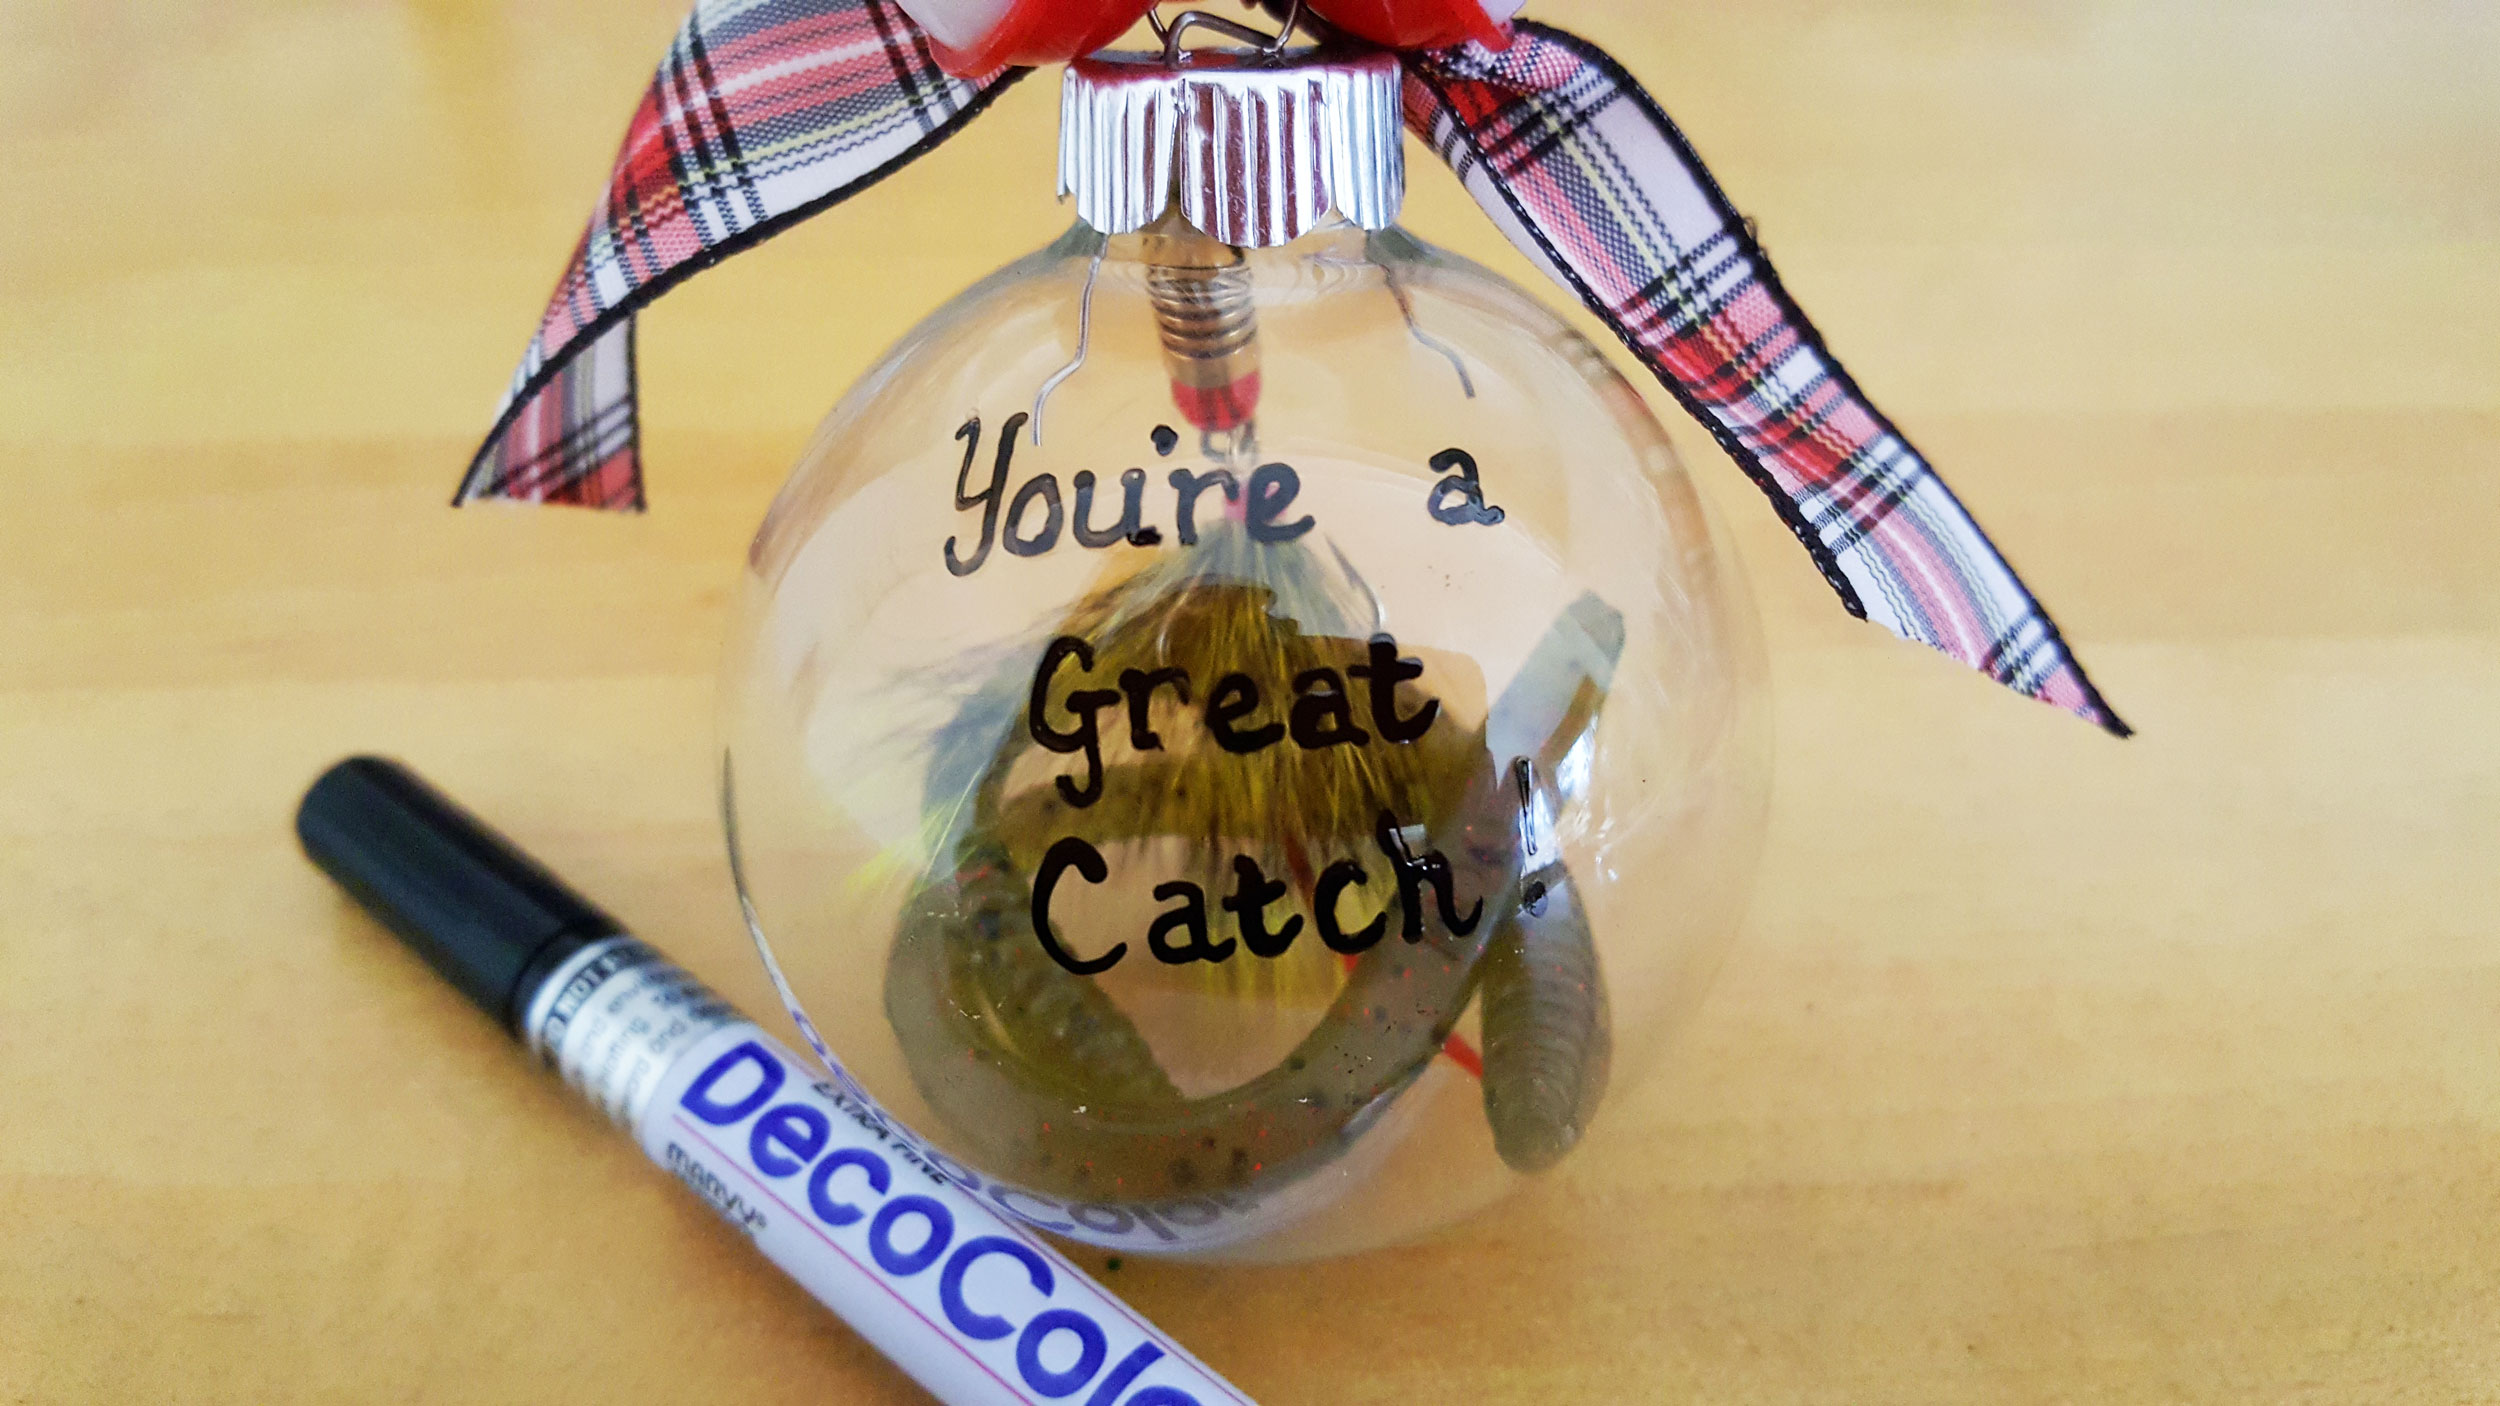 "You're a Great Catch" on Fishing Ornament | OrnamentShop.com